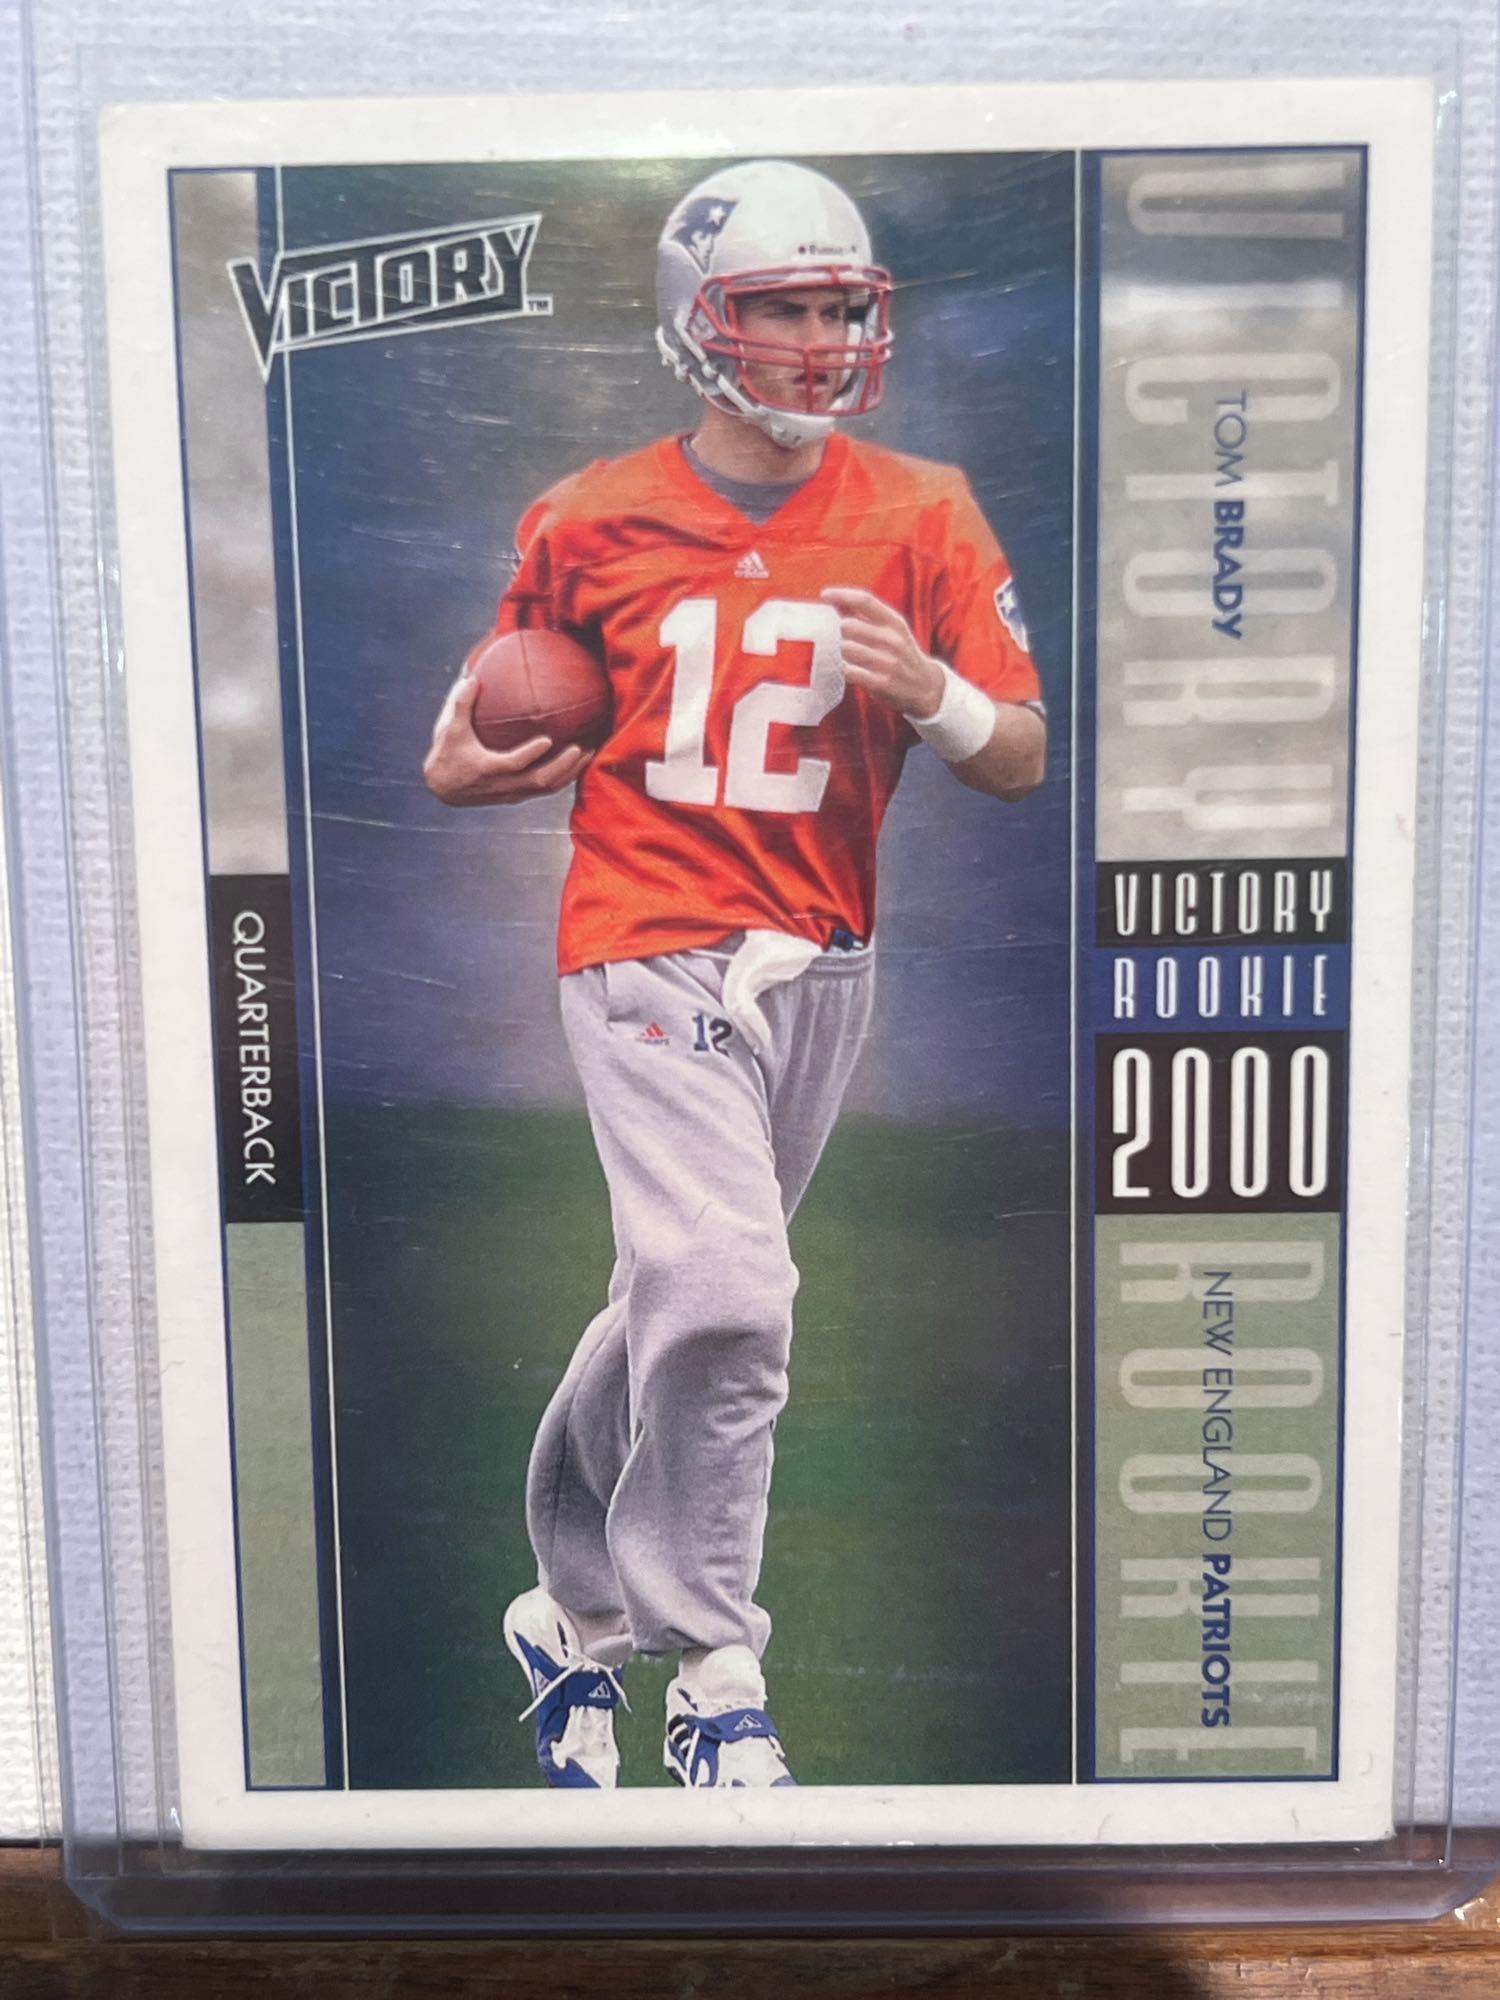 Sold at Auction: Lot of 10 2000 SP Authentic Tom Brady Rookie Card